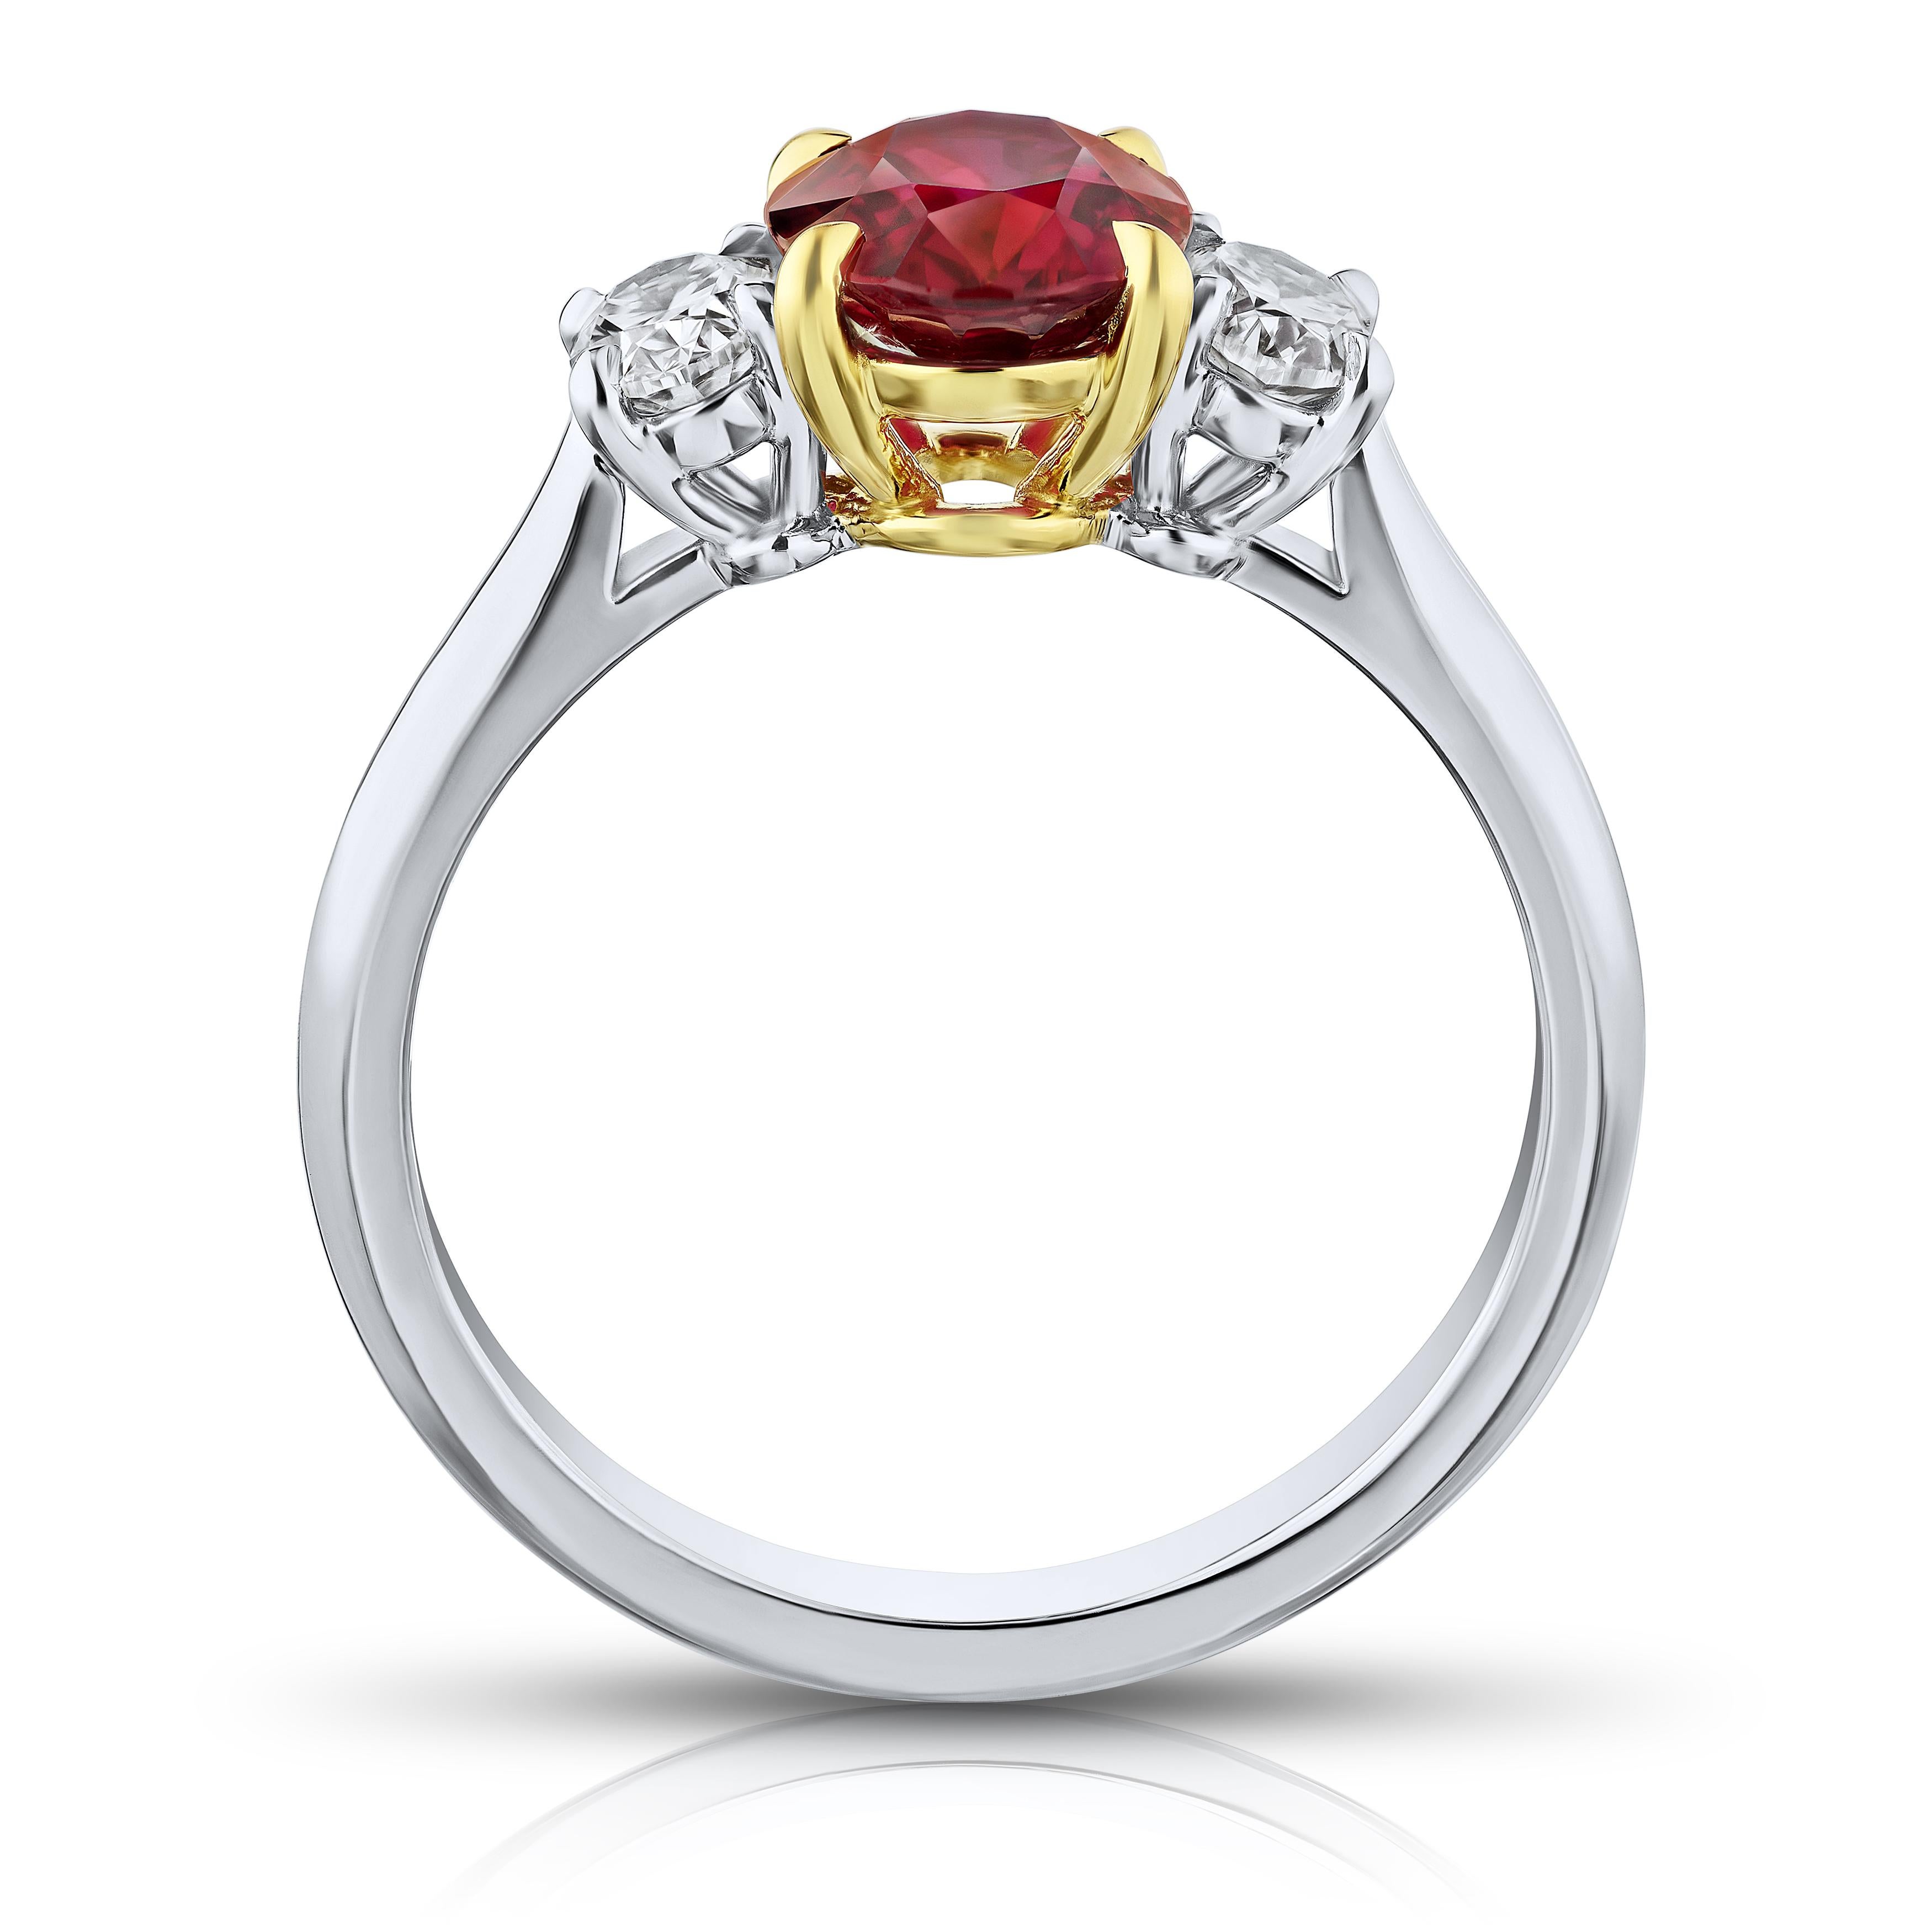 1.76 carat oval red ruby with oval diamonds .56 carats set in a platinum with 18k yellow gold ring. 
Ring is currently a size 7. Resizing to your finger size is included.